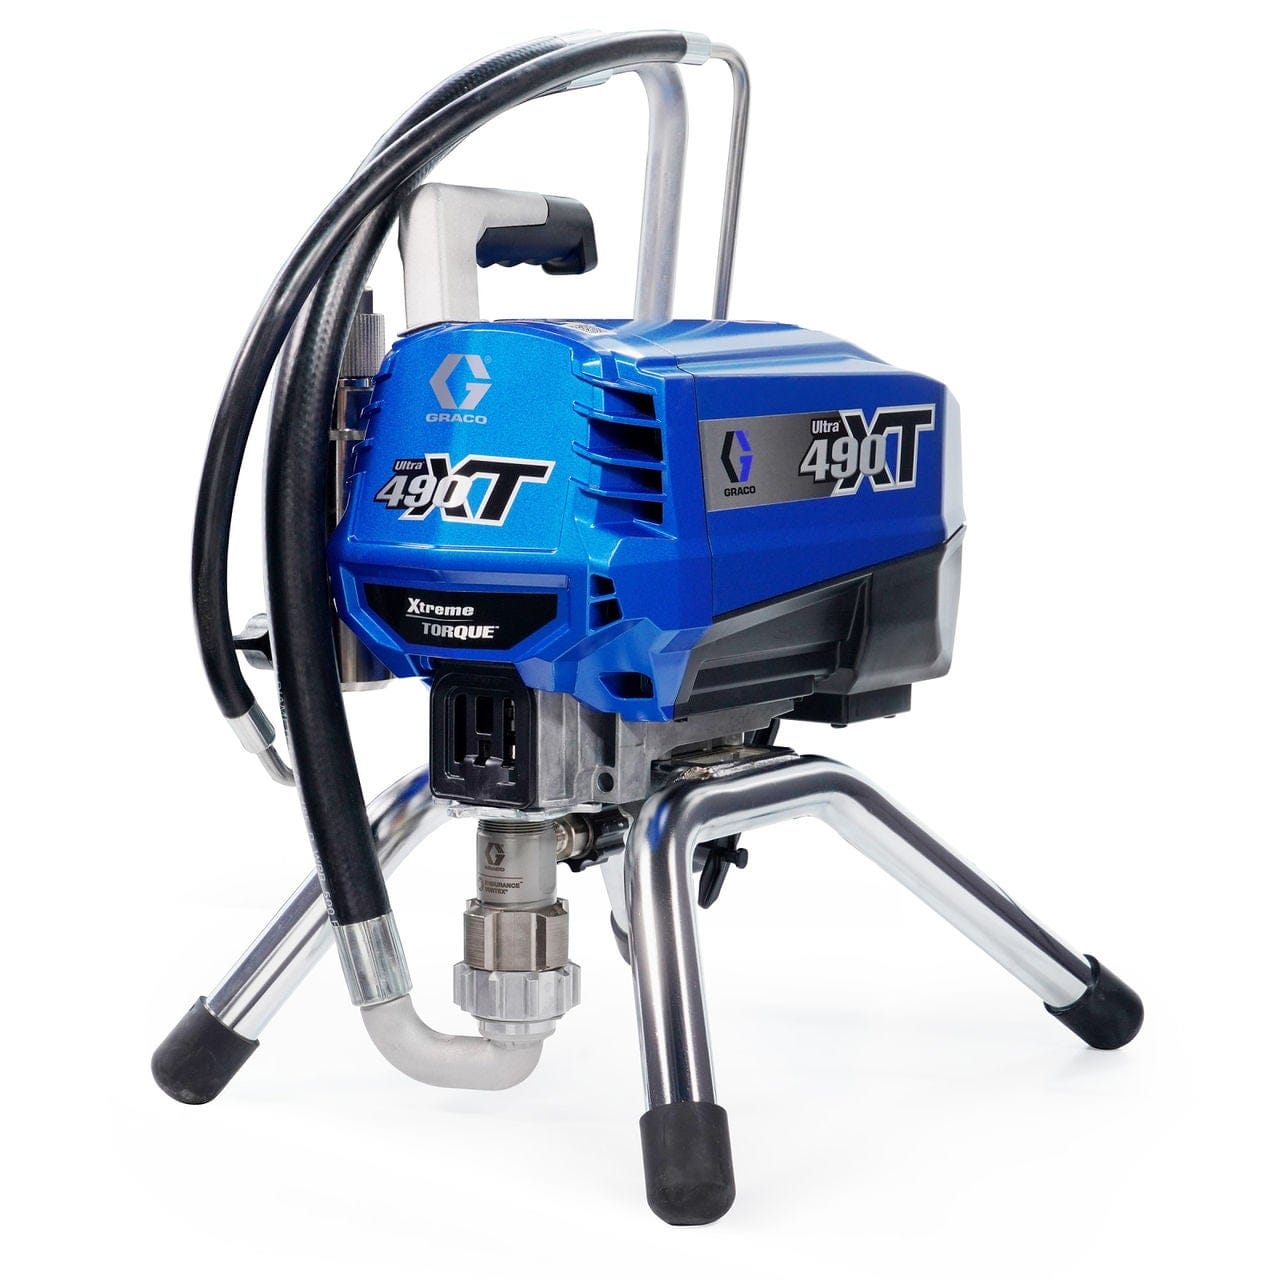 Graco Ultra 490 XT Electric Airless Sprayer, Stand